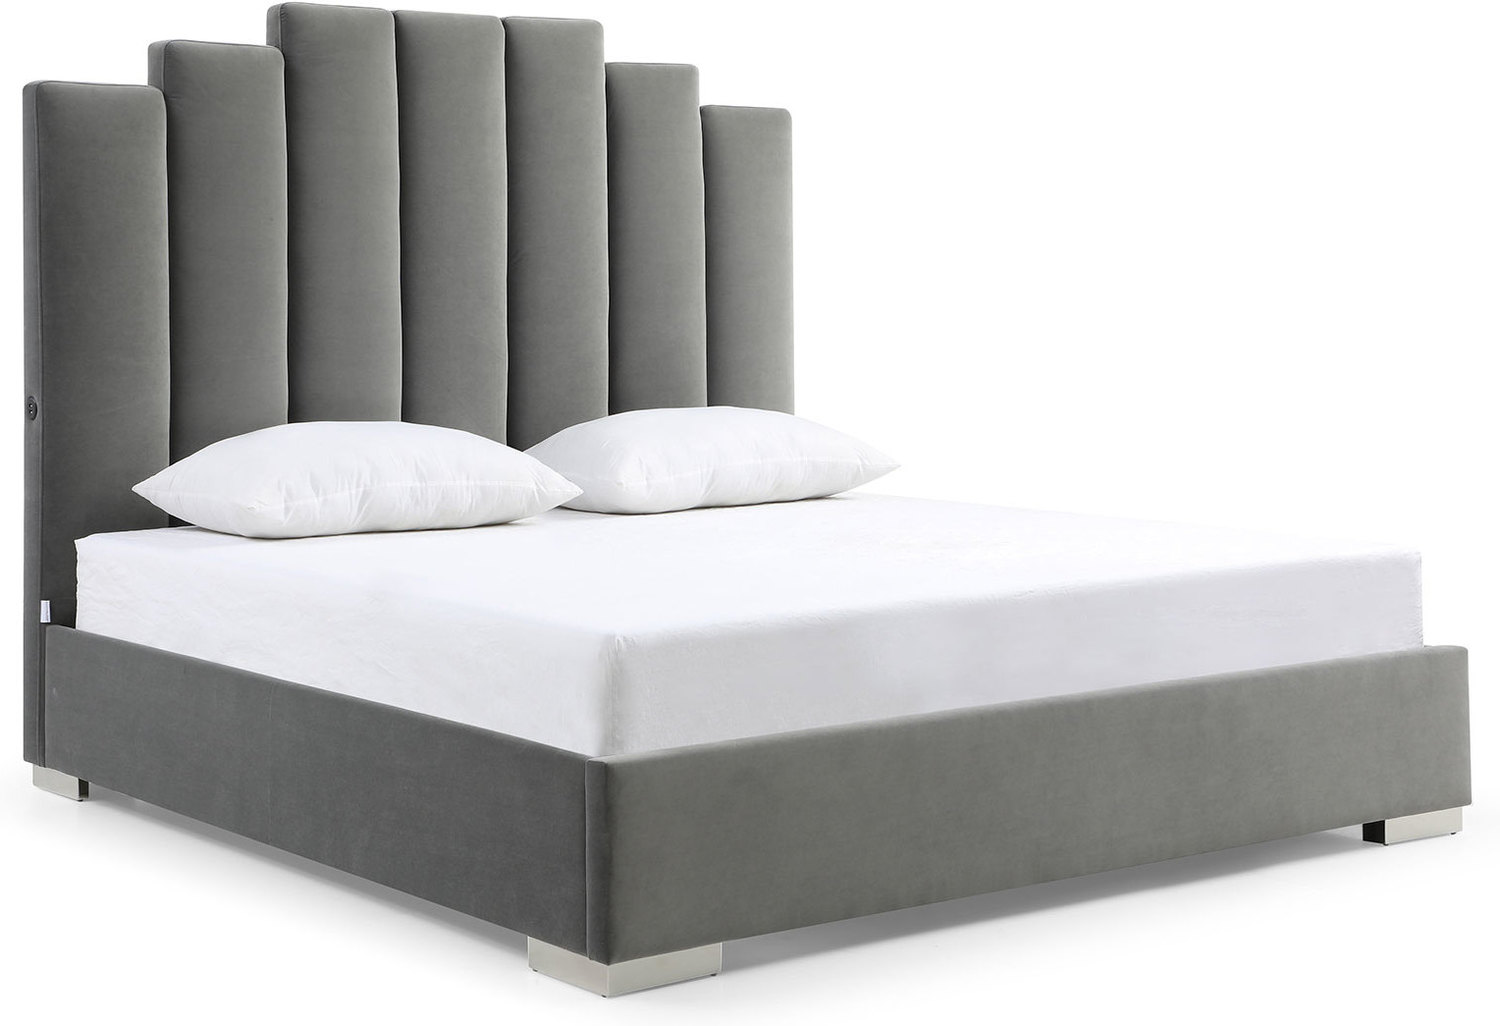 high king bed frame with storage WhiteLine Bedroom Beds